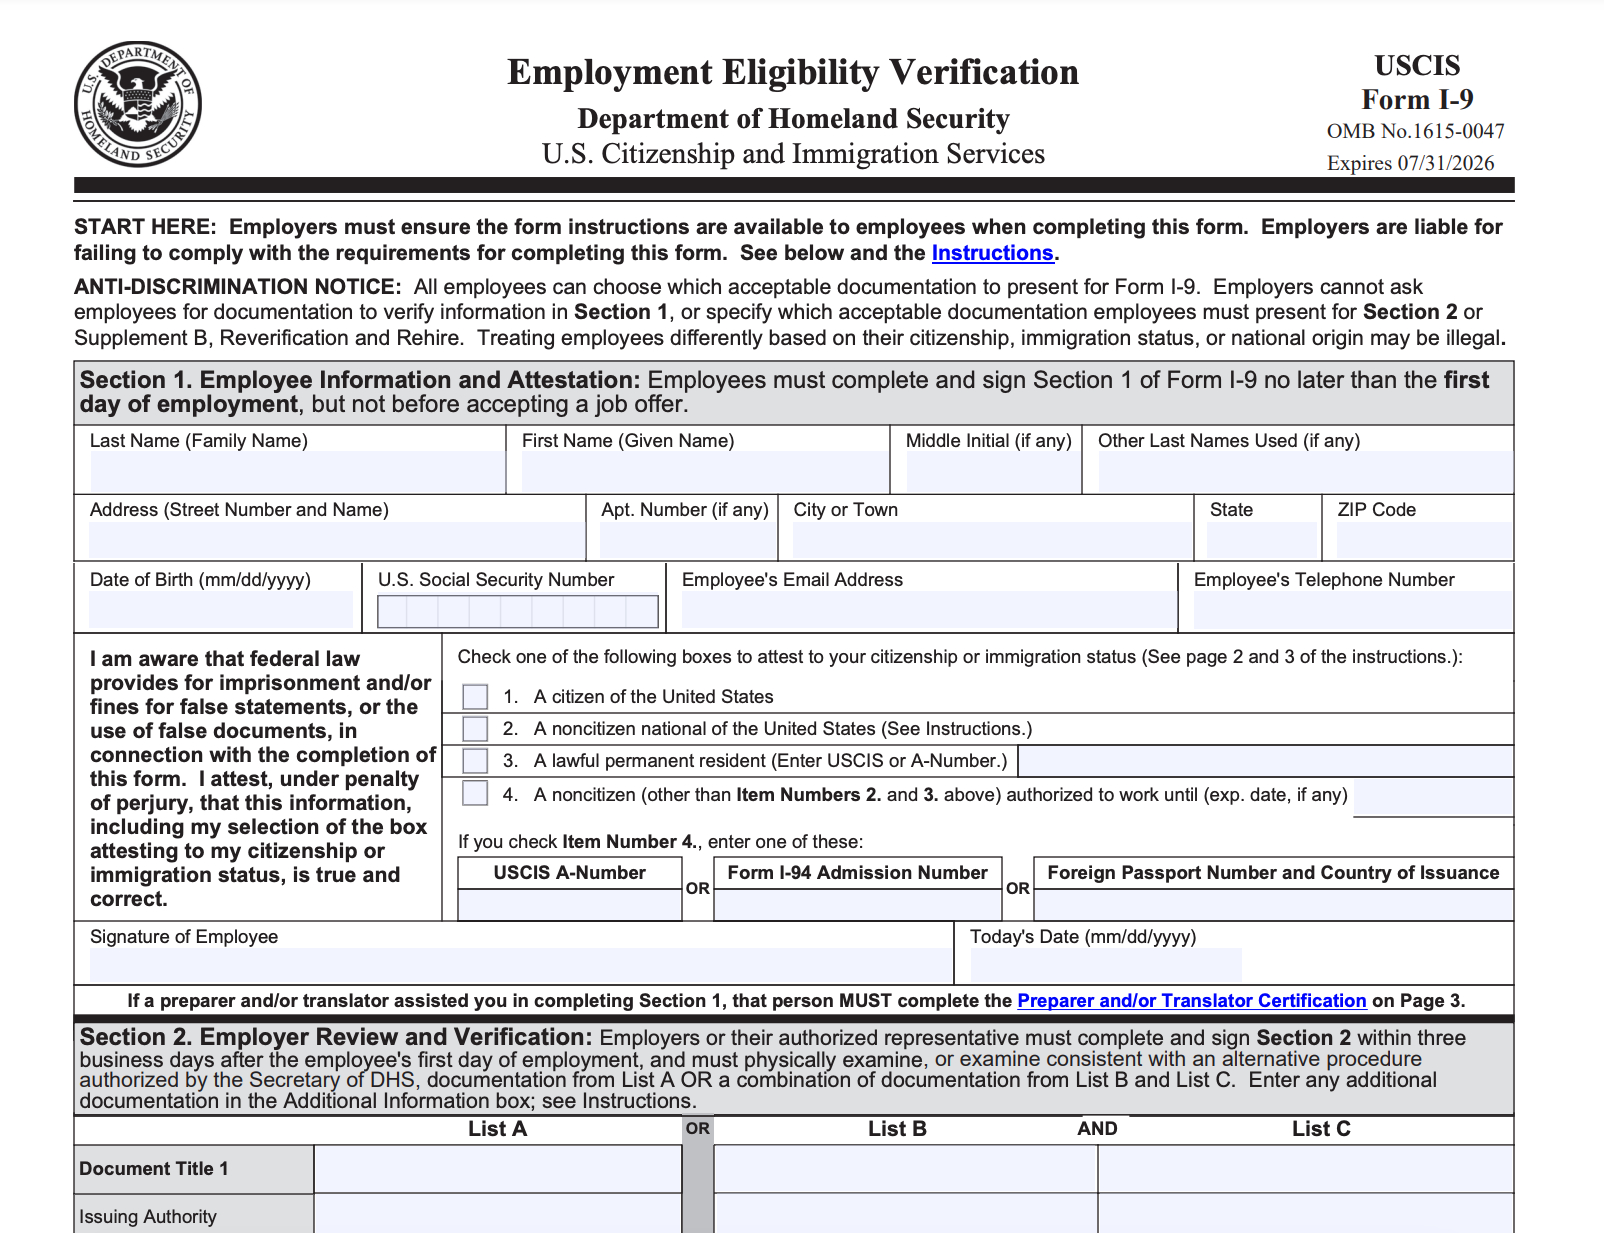 Form I-9, Explained - Boundless with regard to I-9 Form Requirements